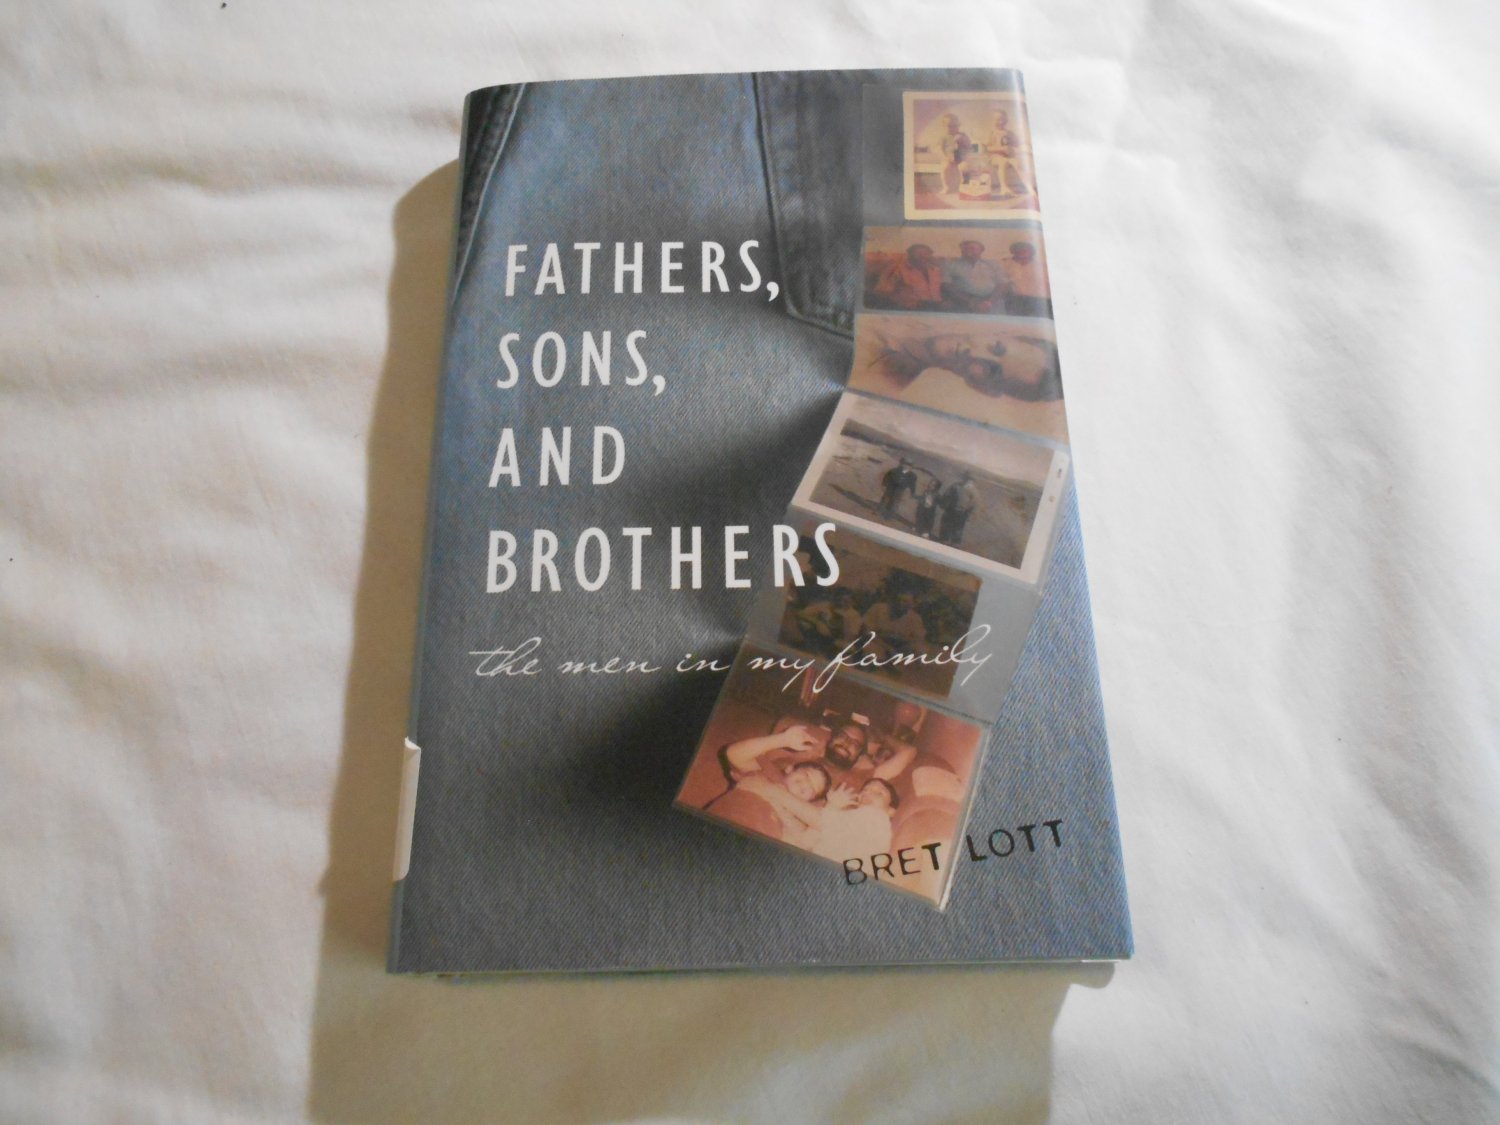 Fathers Sons And Brothers by Bret Lott (1997) (64) Family Relationships, Literature